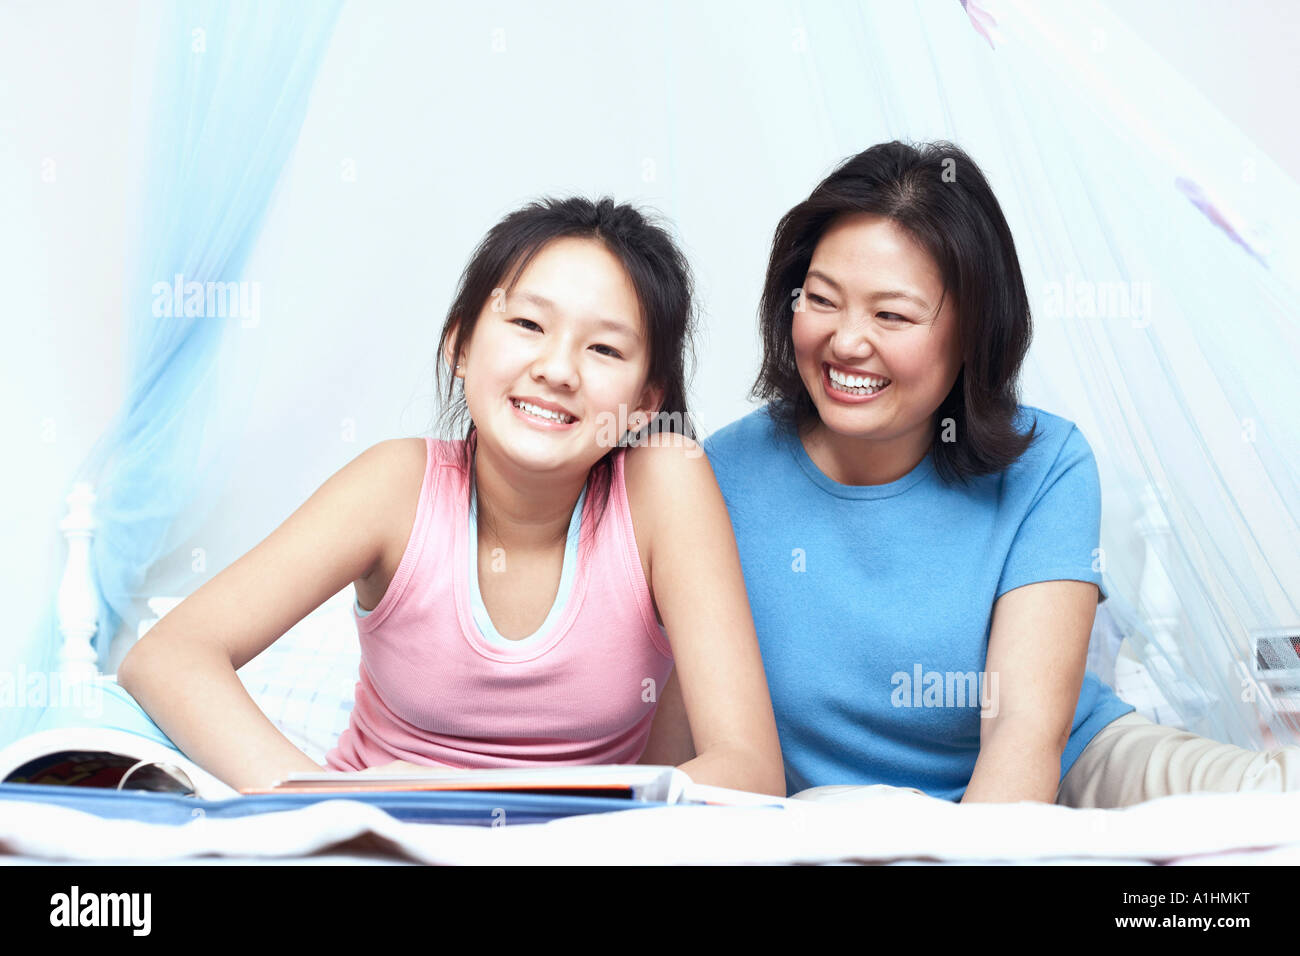 Mother and her daughter smiling Stock Photo